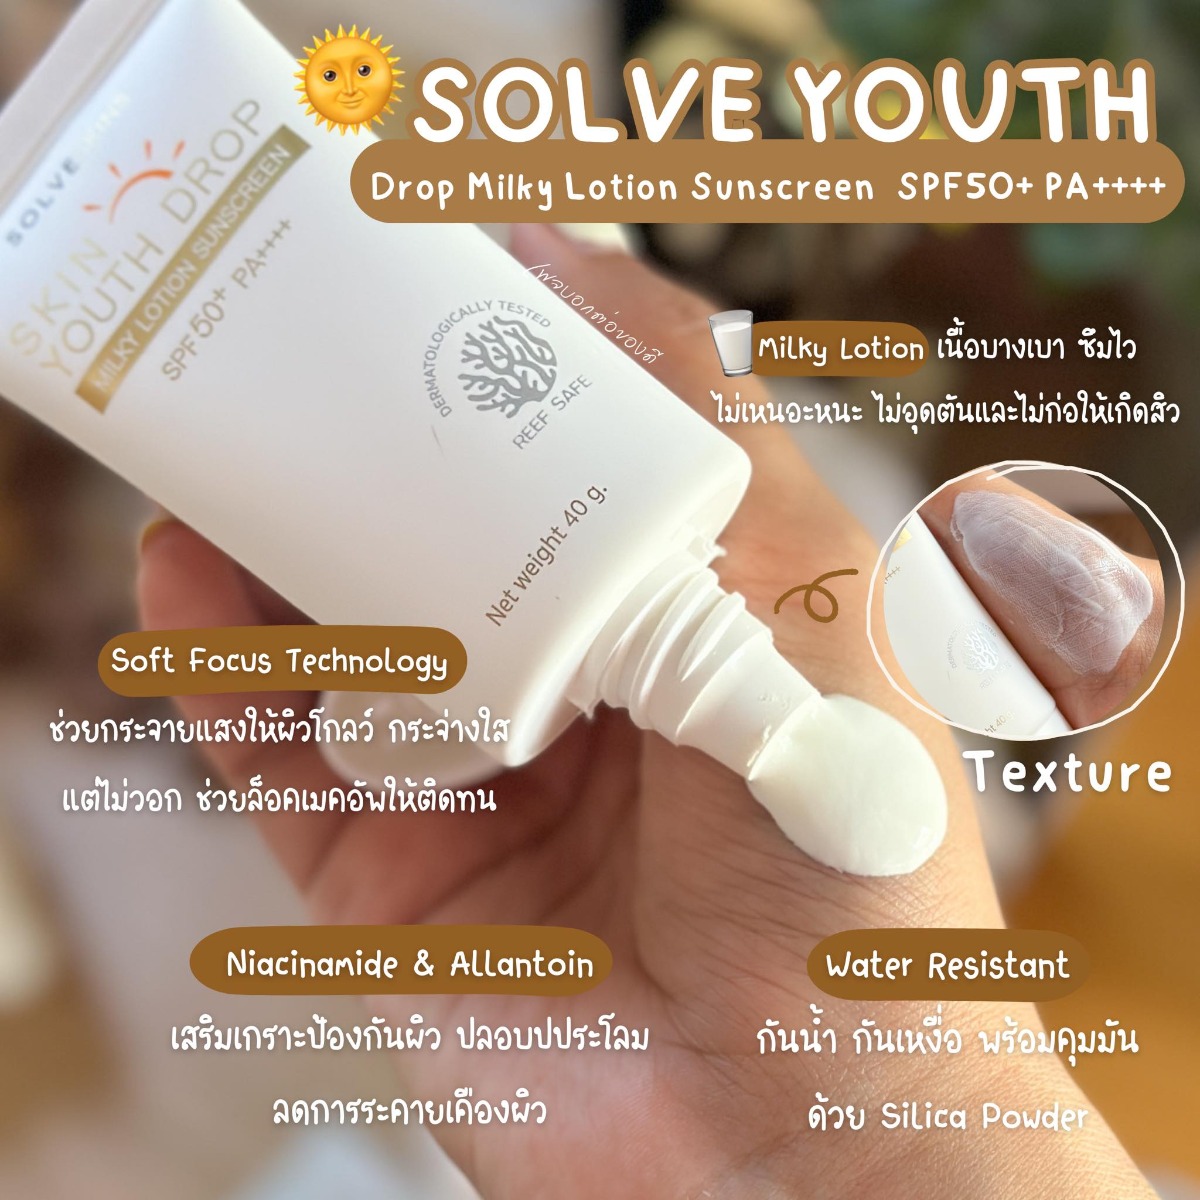 Solve Youth Drop Milky Lotion Sunscreen SPF50+ PA++++